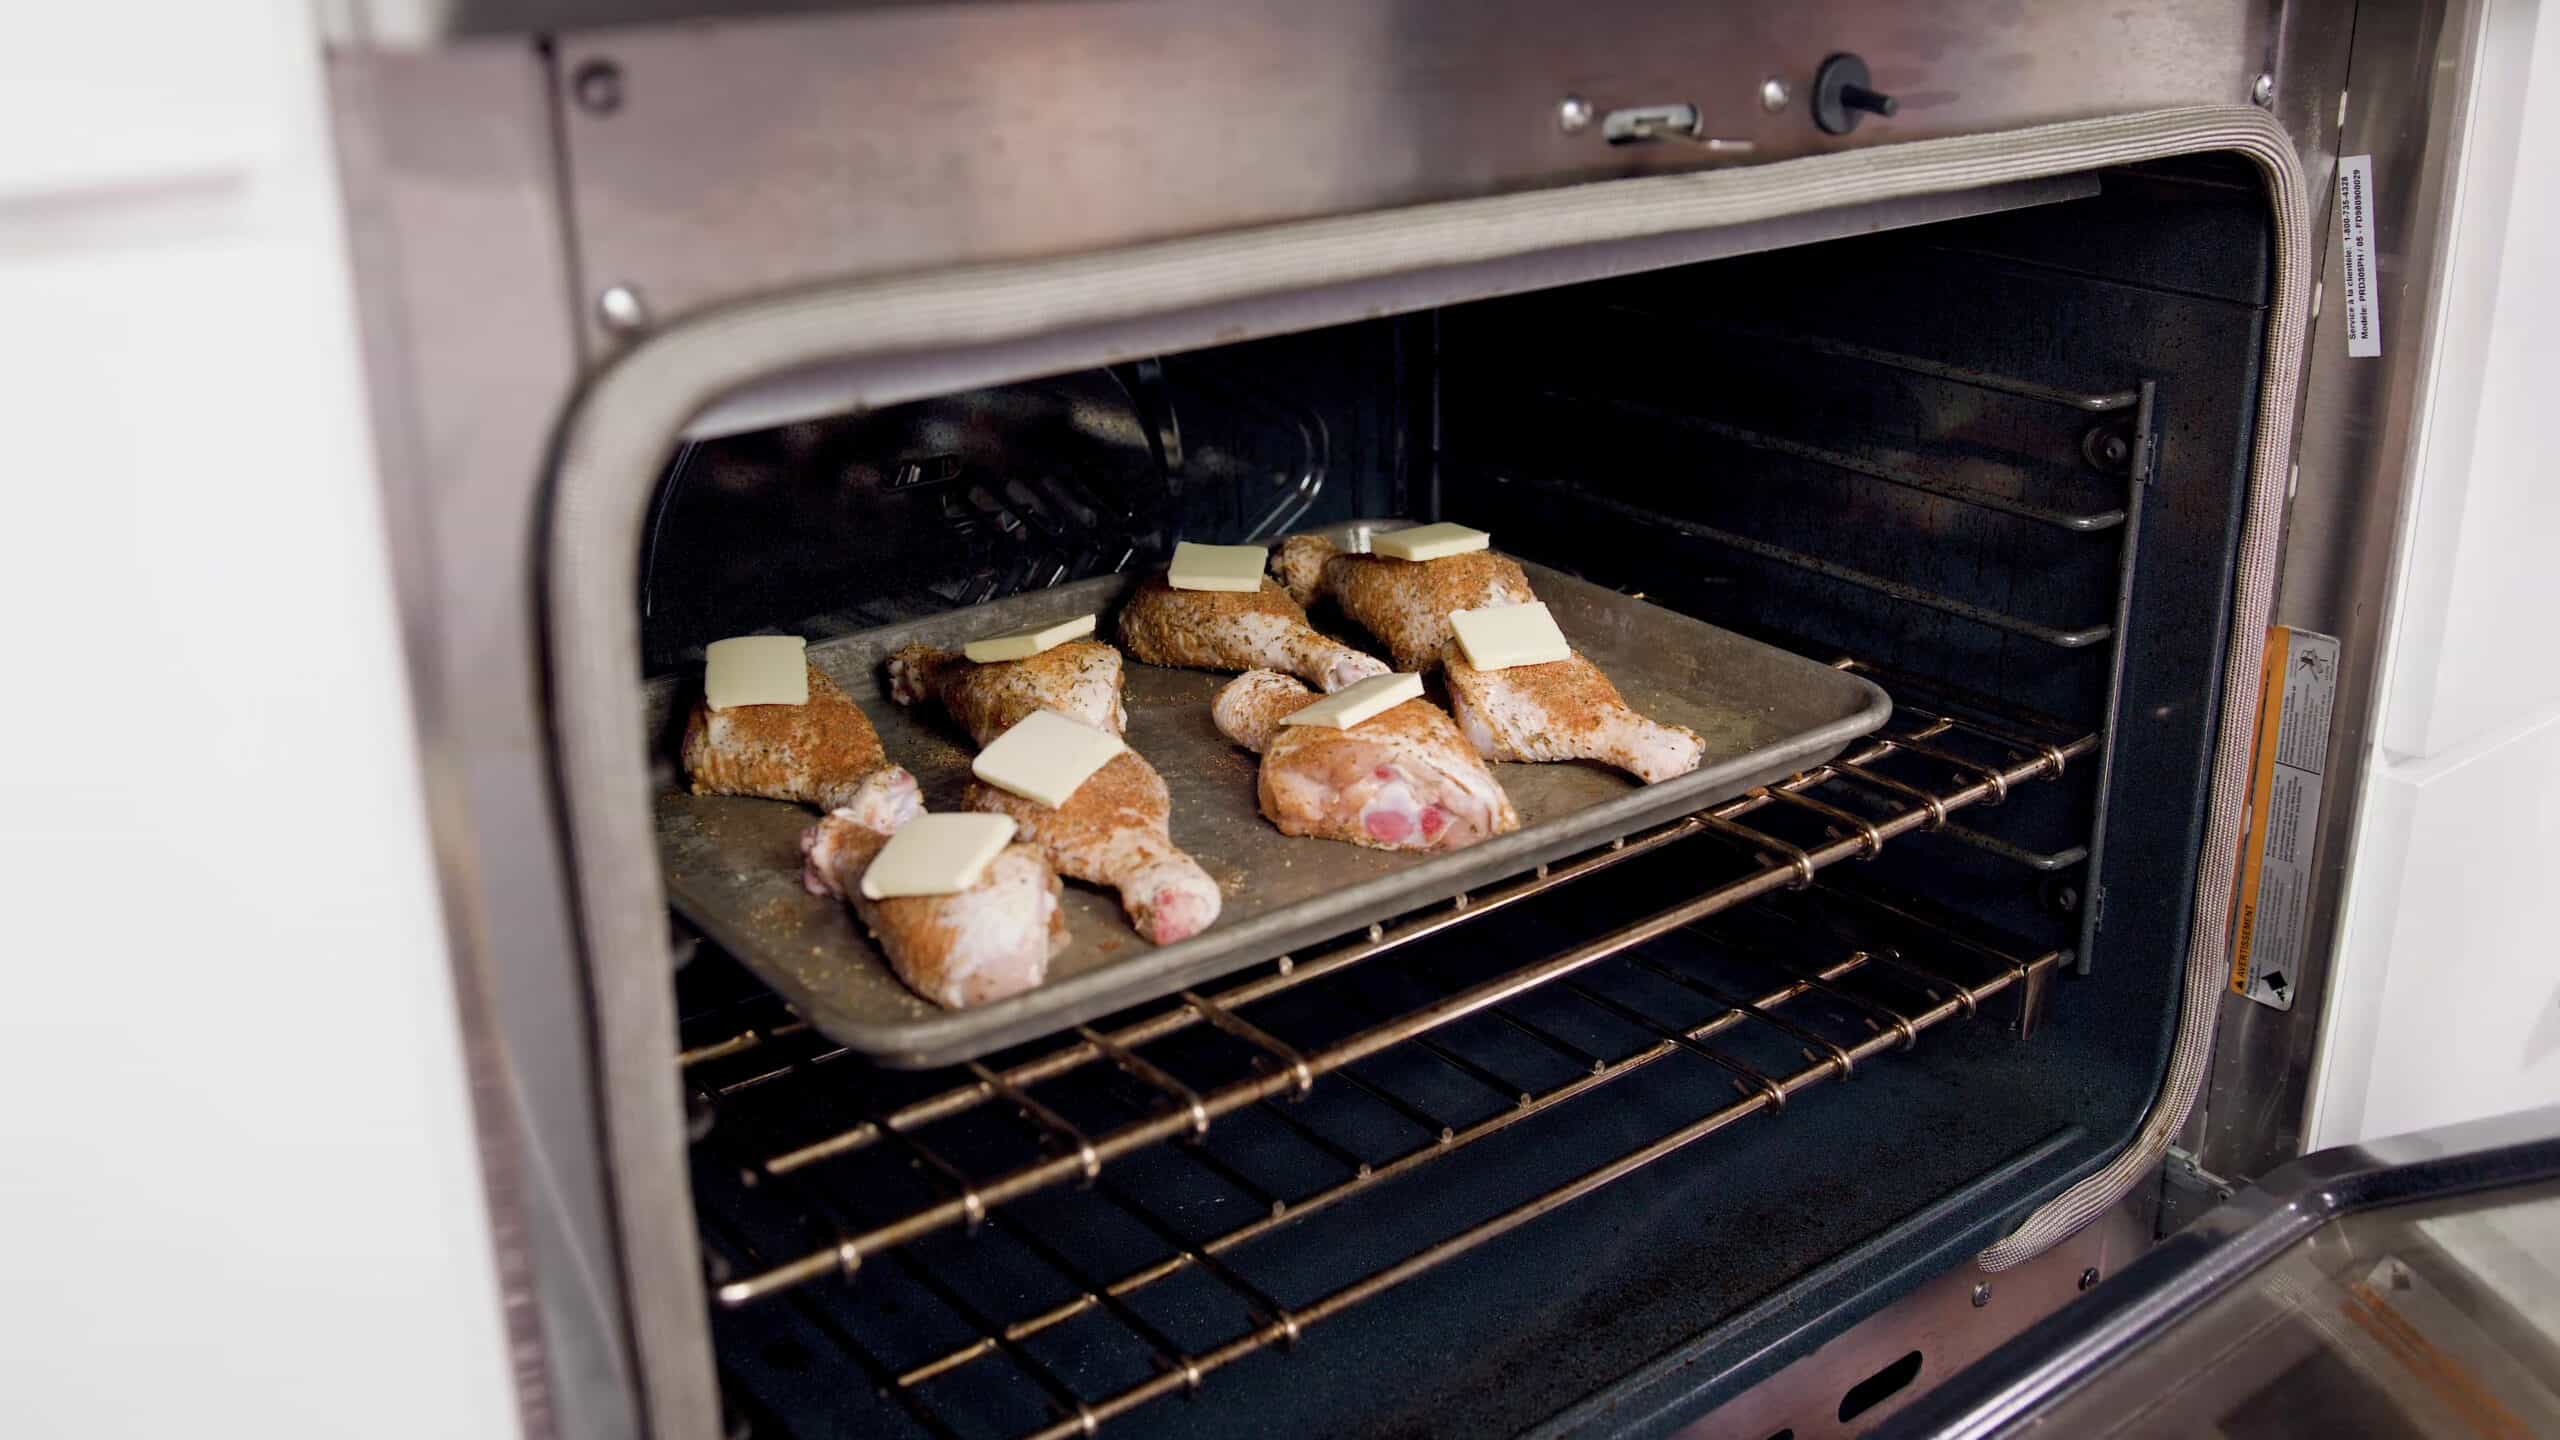 Angled view of an open oven with a greased metal baking sheet filled with eight raw chicken drumsticks coated with dry cajun spices and each drumstick topped with a pad of butter, placed on a metal rack in the middle of the oven.